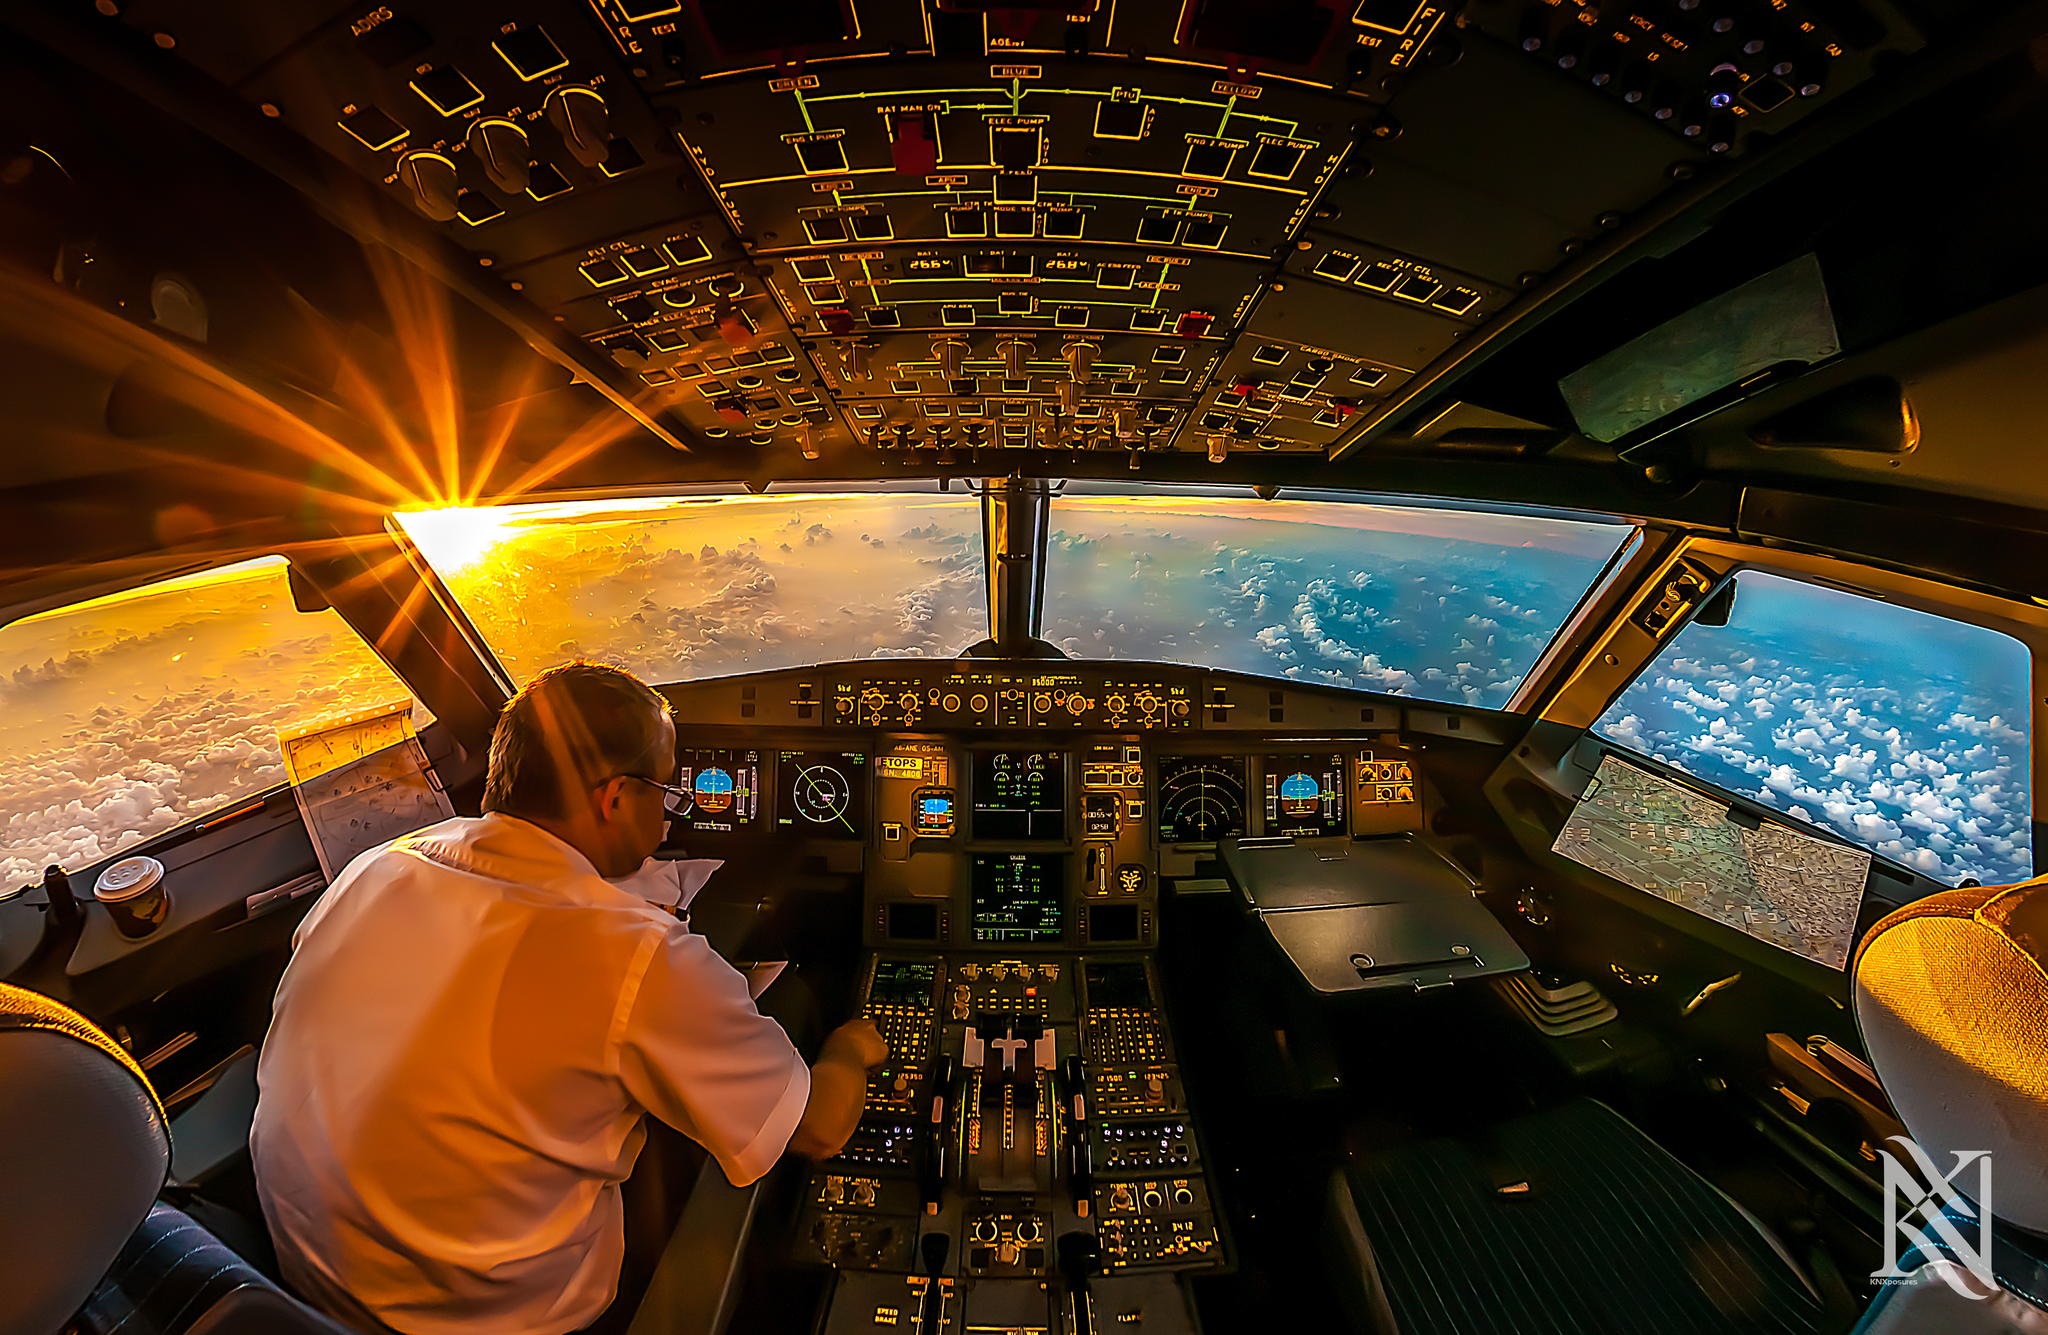 25 Awesome In-Flight Photos Taken by Pilots from the Cockpit